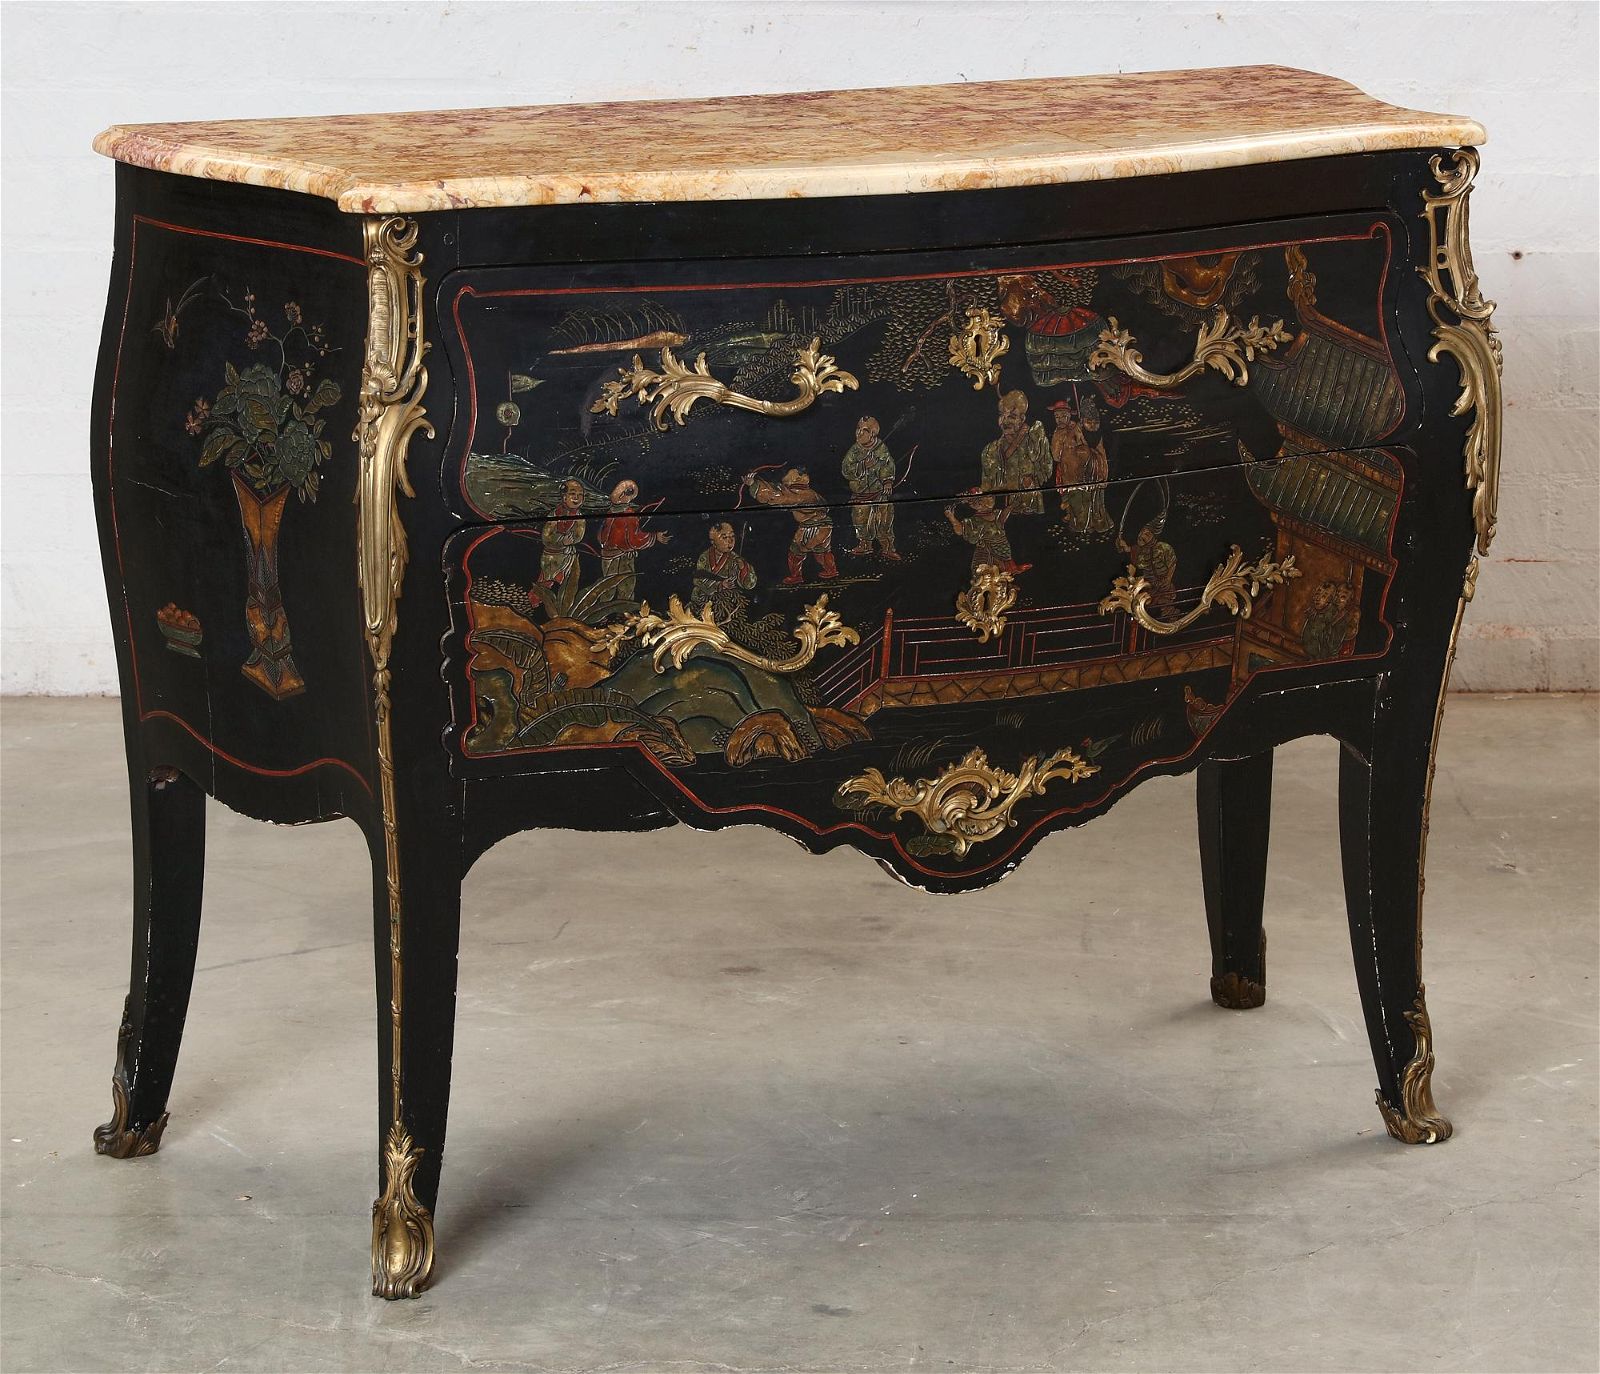 A LOUIS XV STYLE POLYCHROME LACQUERED